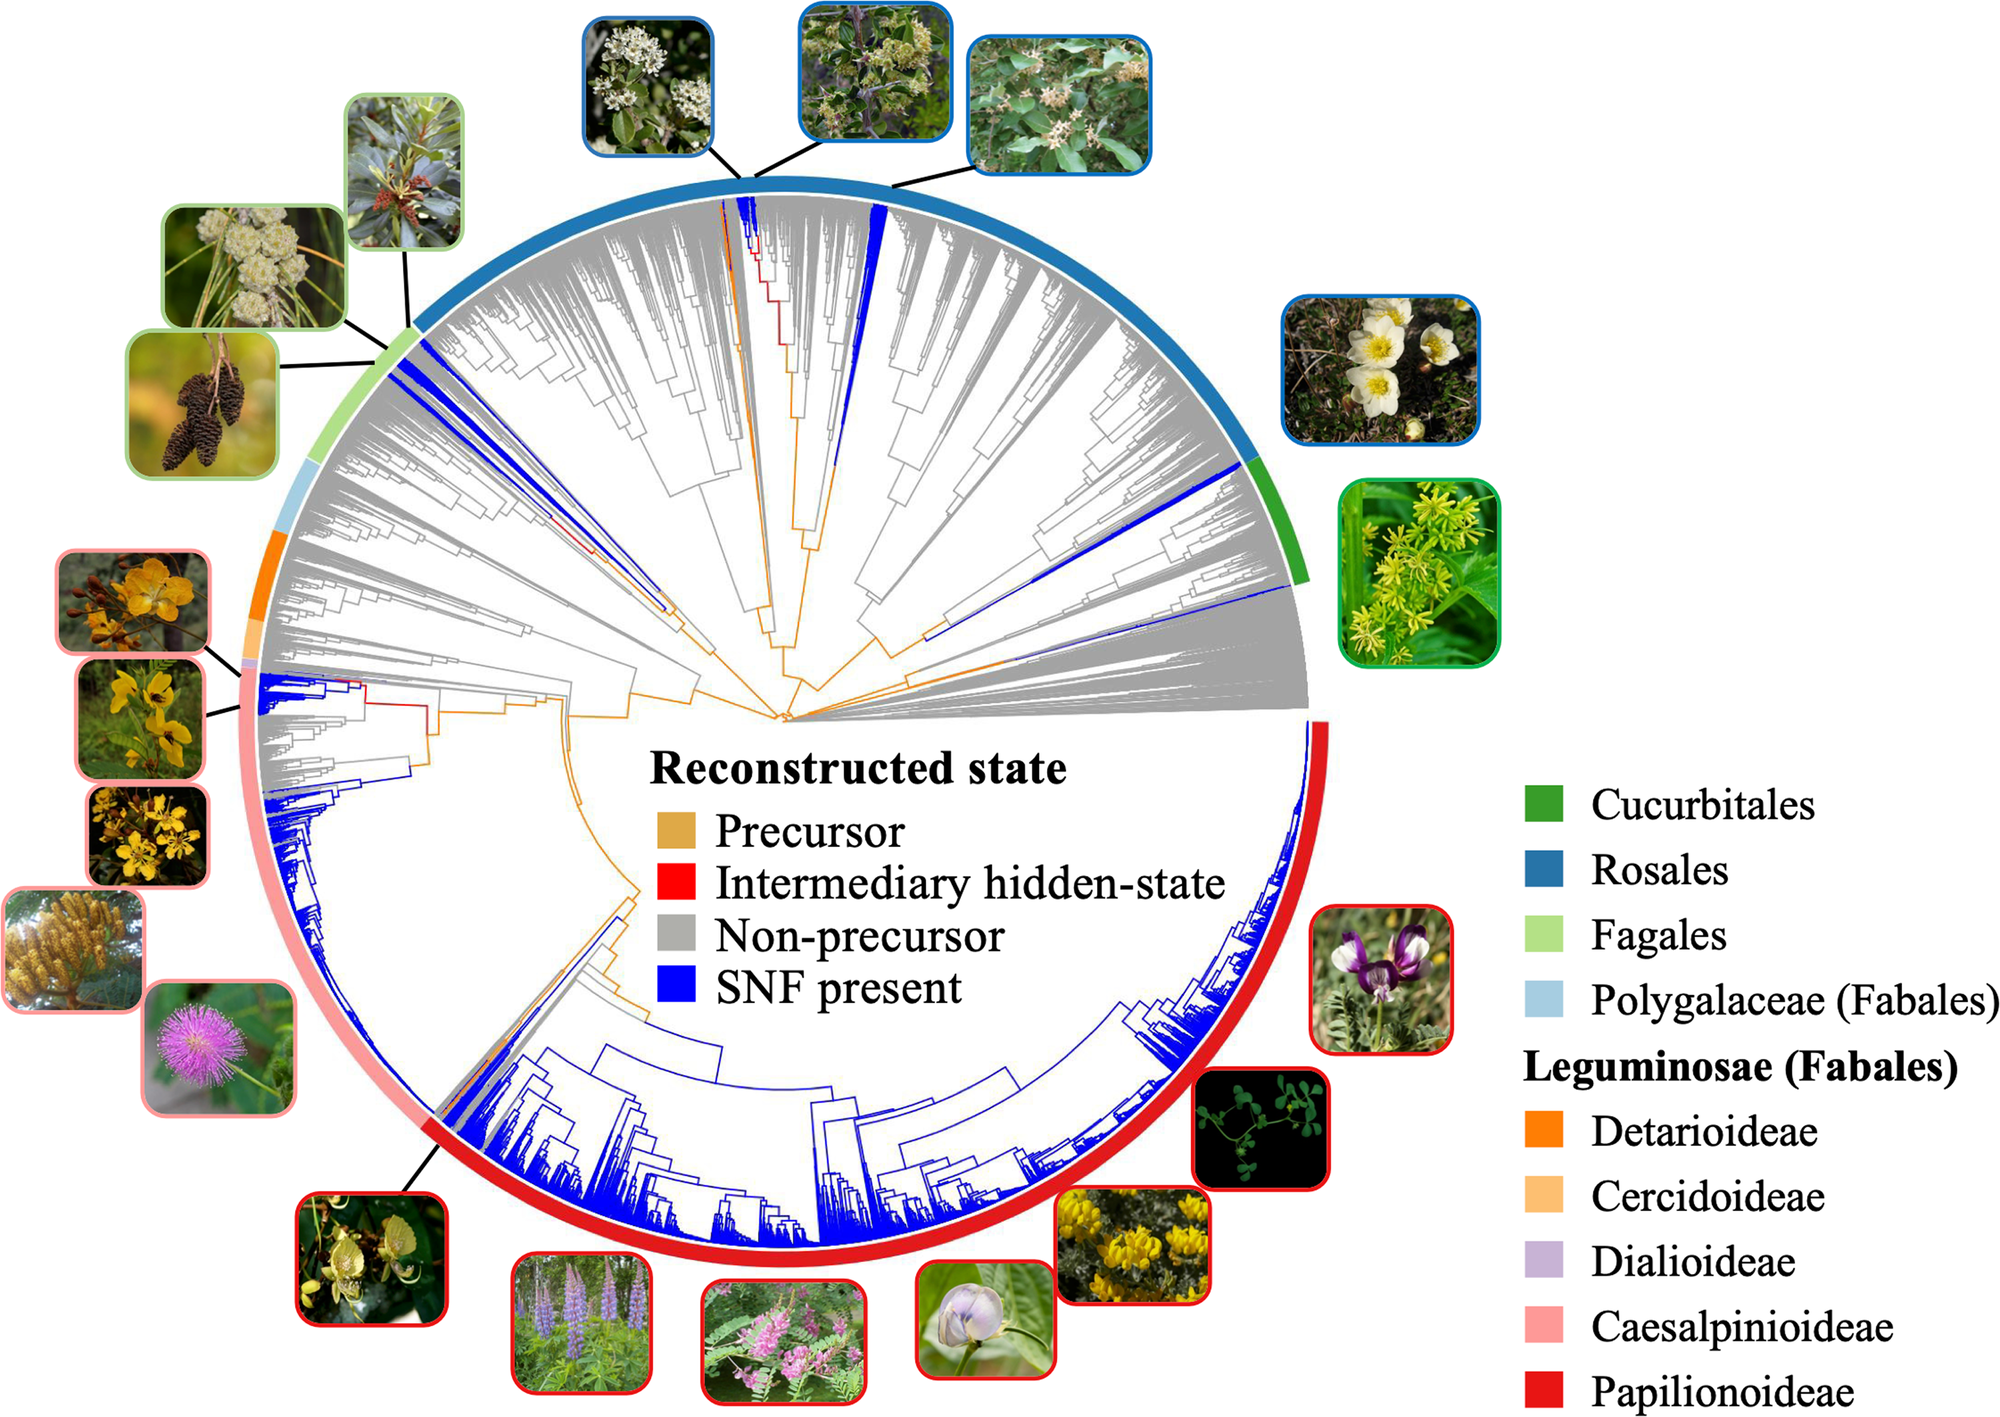 A circular phylogeny with several images of representative plants surrounding it. 